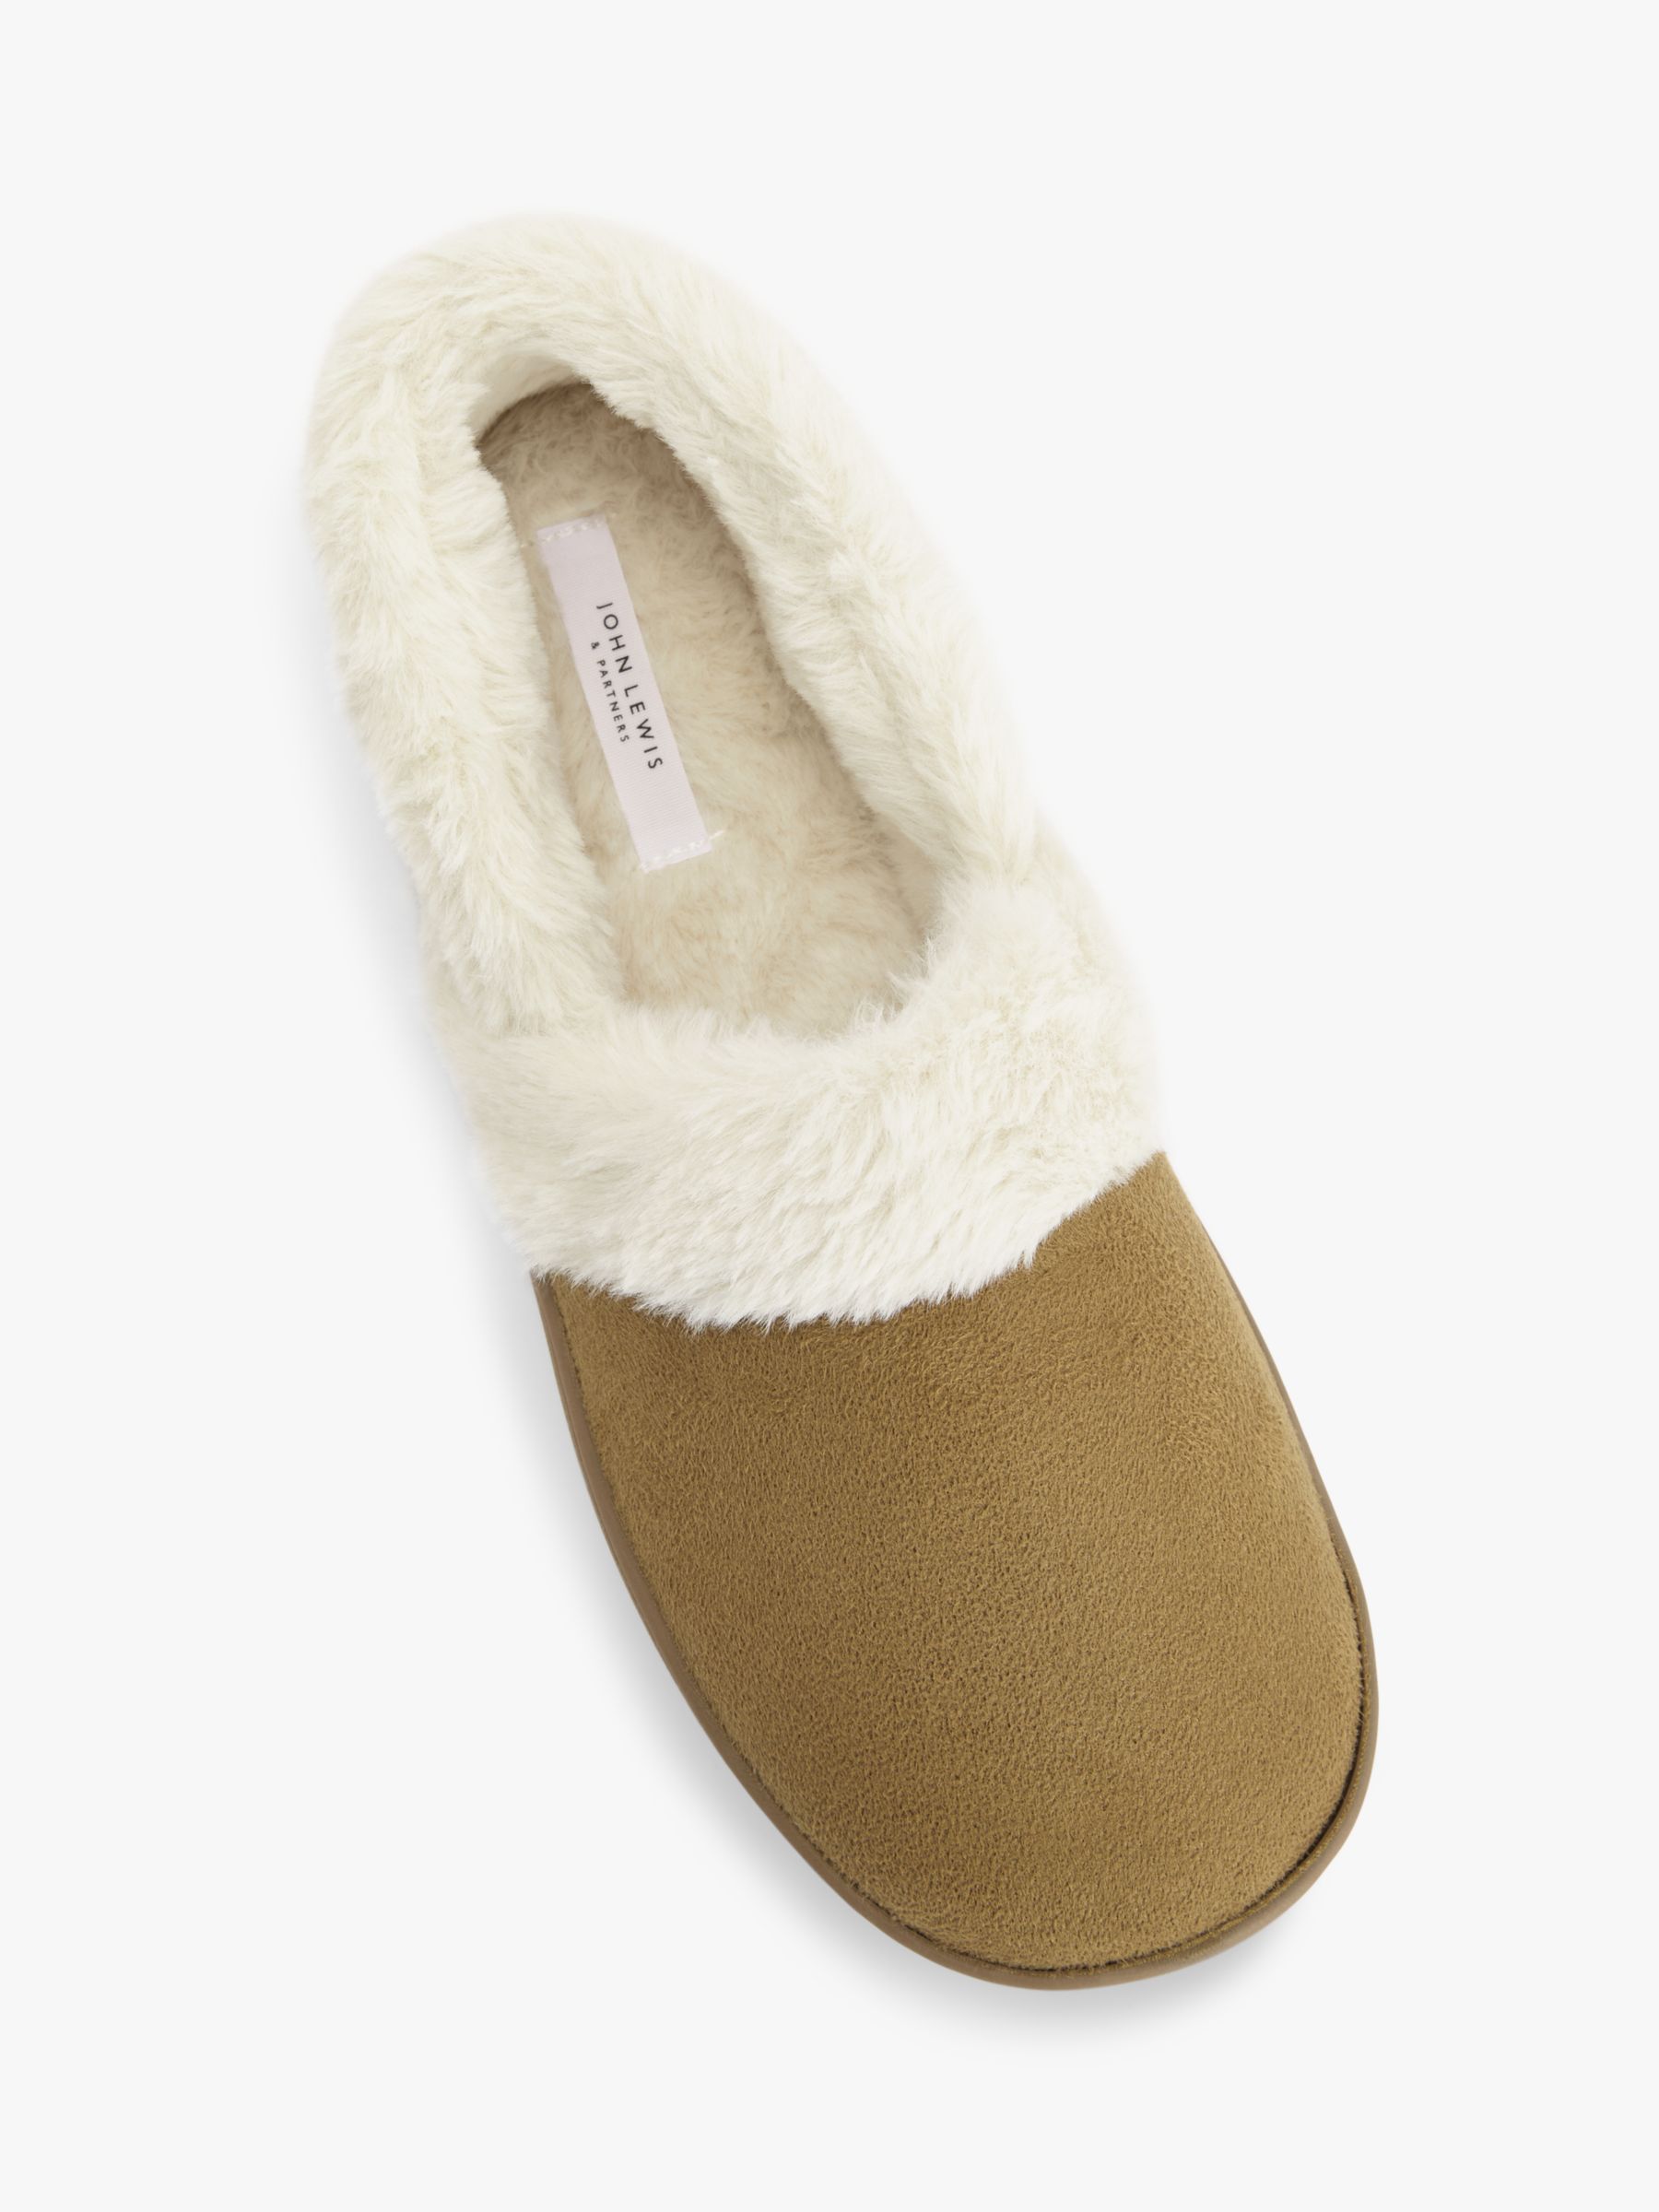 LV mirrored quality mink fur slippers